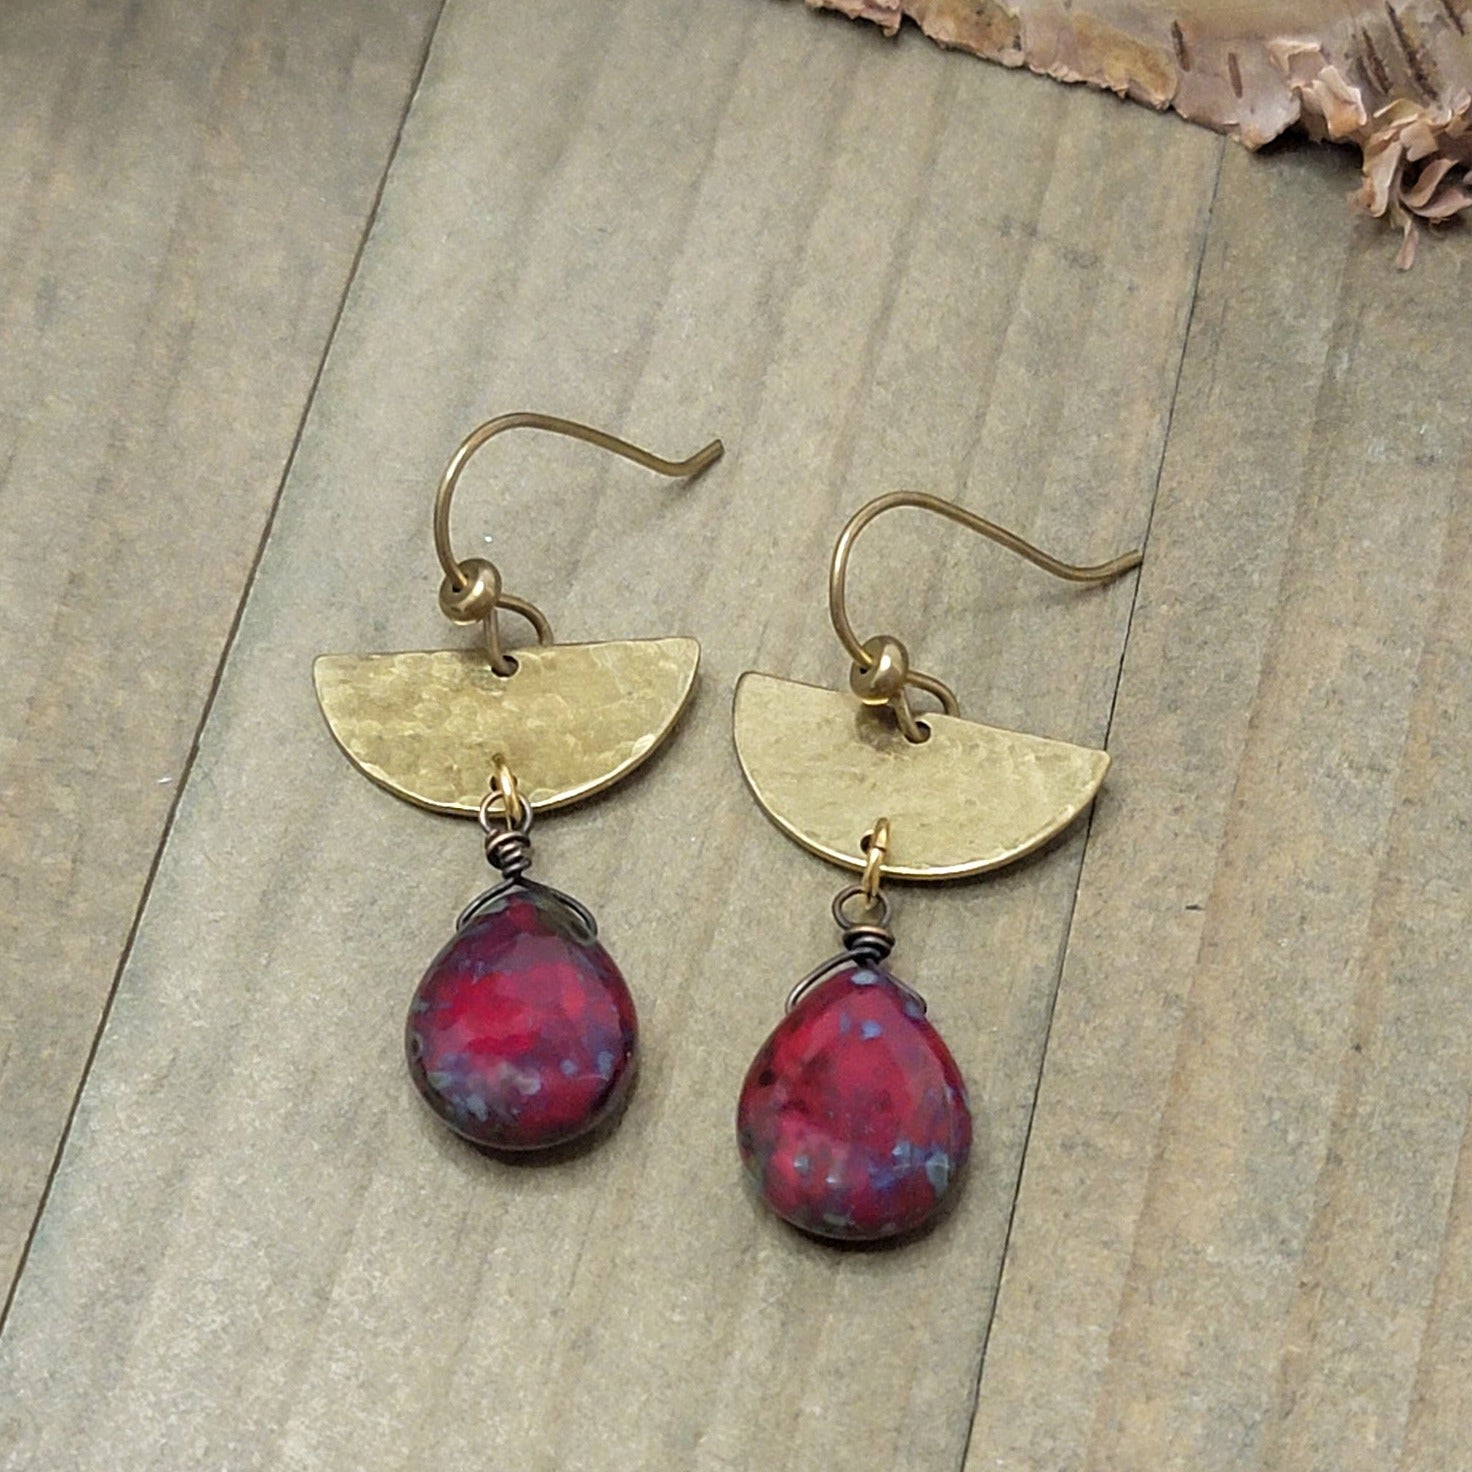 Gold Textured Half Moon Earrings with Red Picasso Czech Glass Teardrops, Nicki Lynn Jewelry 